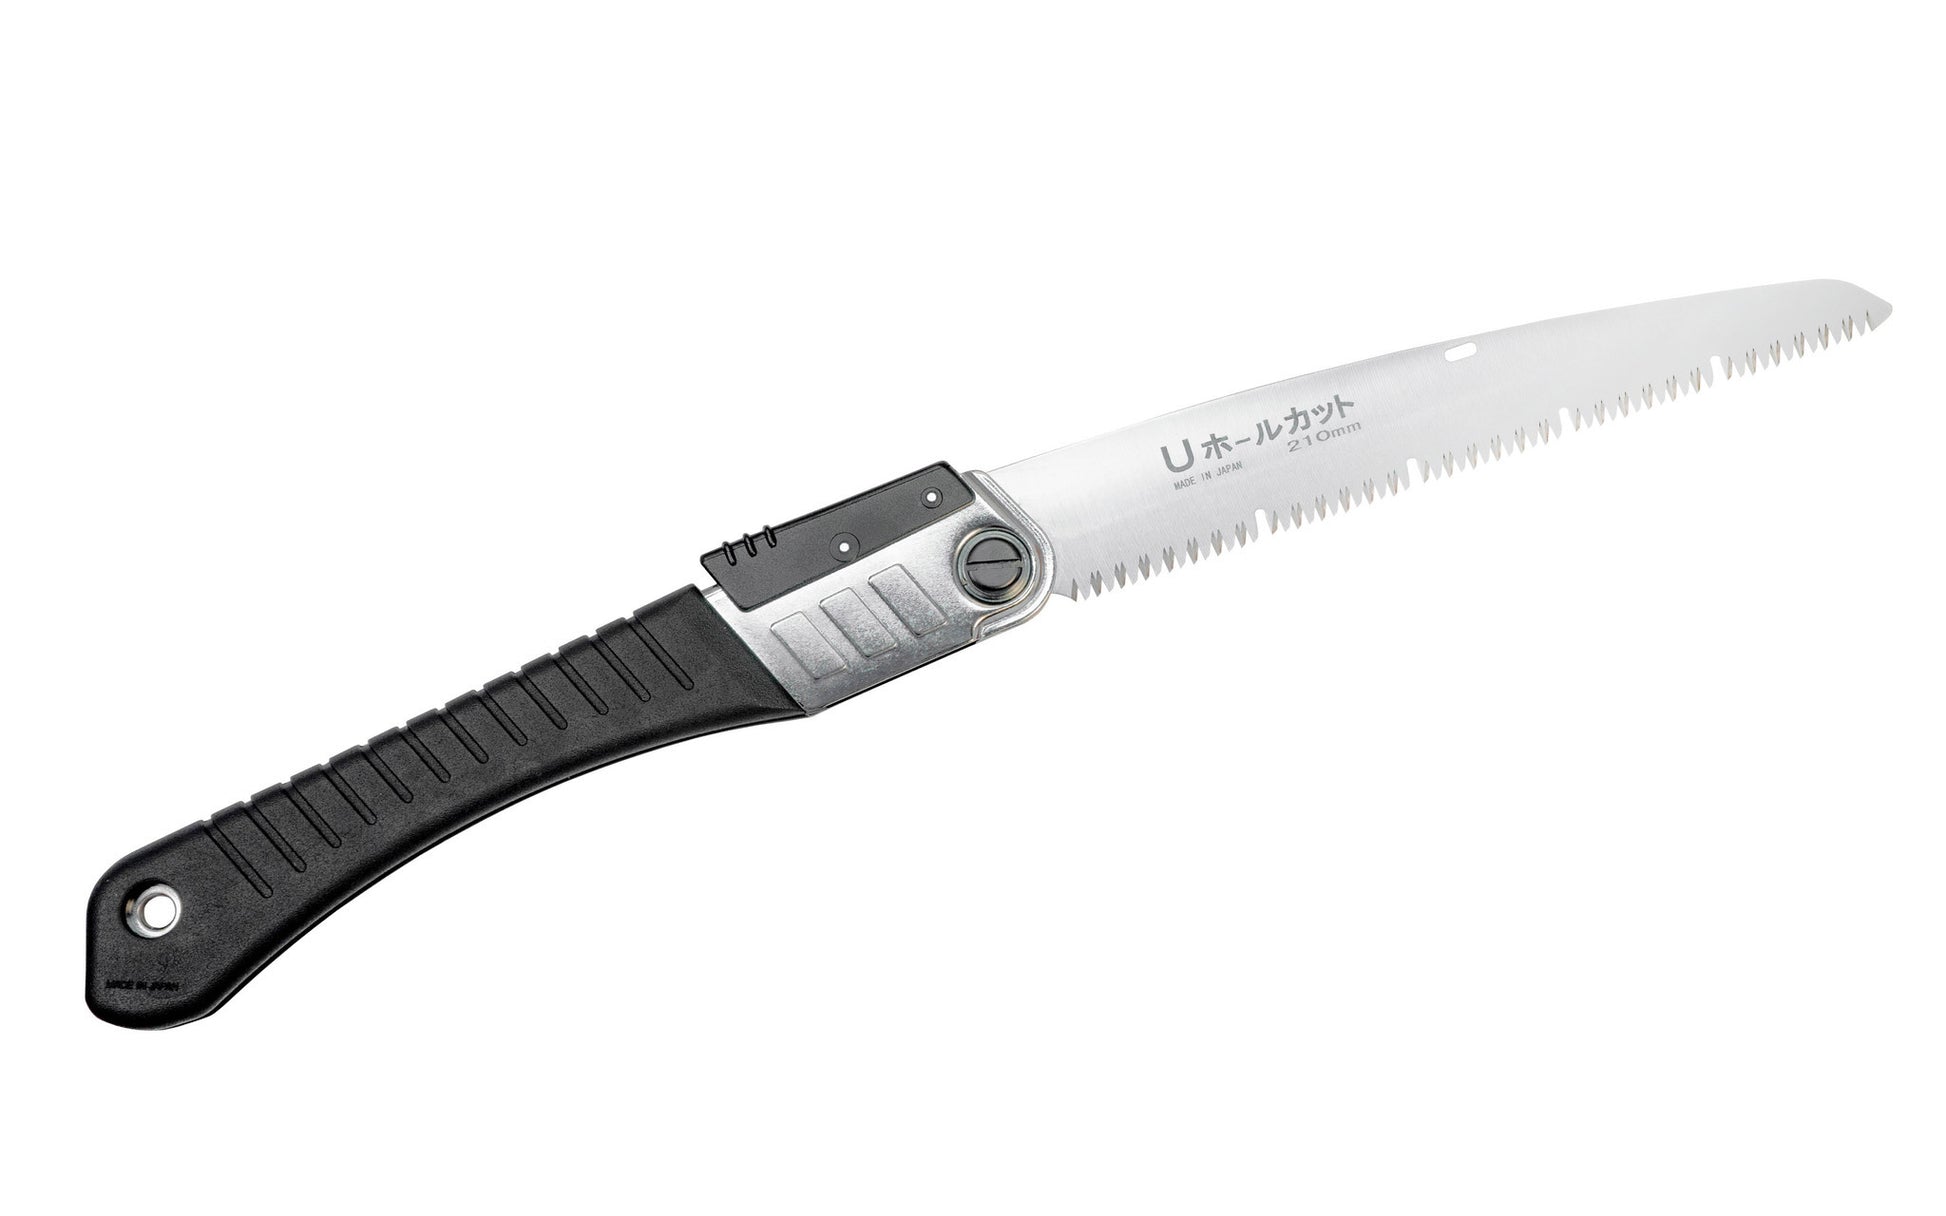 Made in Japan Versatile coarse saw - good for green & dry woods Foldable blade Crosscut Teeth: 9 TPI Overall Saw Length: 17" Spring-loaded blade lock Rubberized handle Blade is removable. 